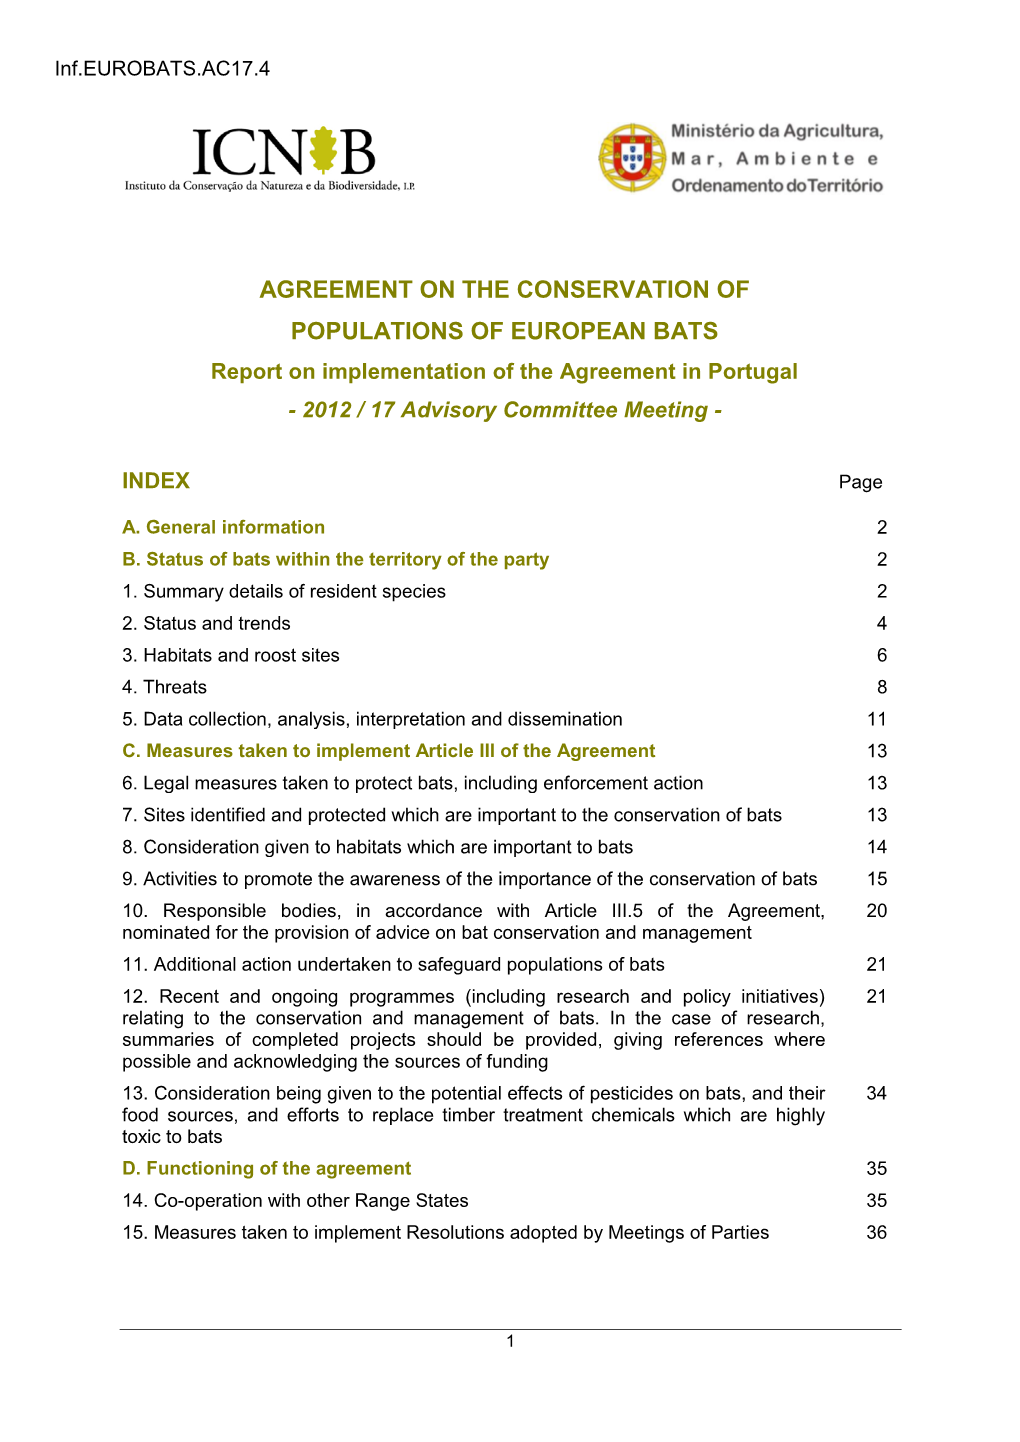 AGREEMENT on the CONSERVATION of POPULATIONS of EUROPEAN BATS Report on Implementation of the Agreement in Portugal - 2012 / 17 Advisory Committee Meeting